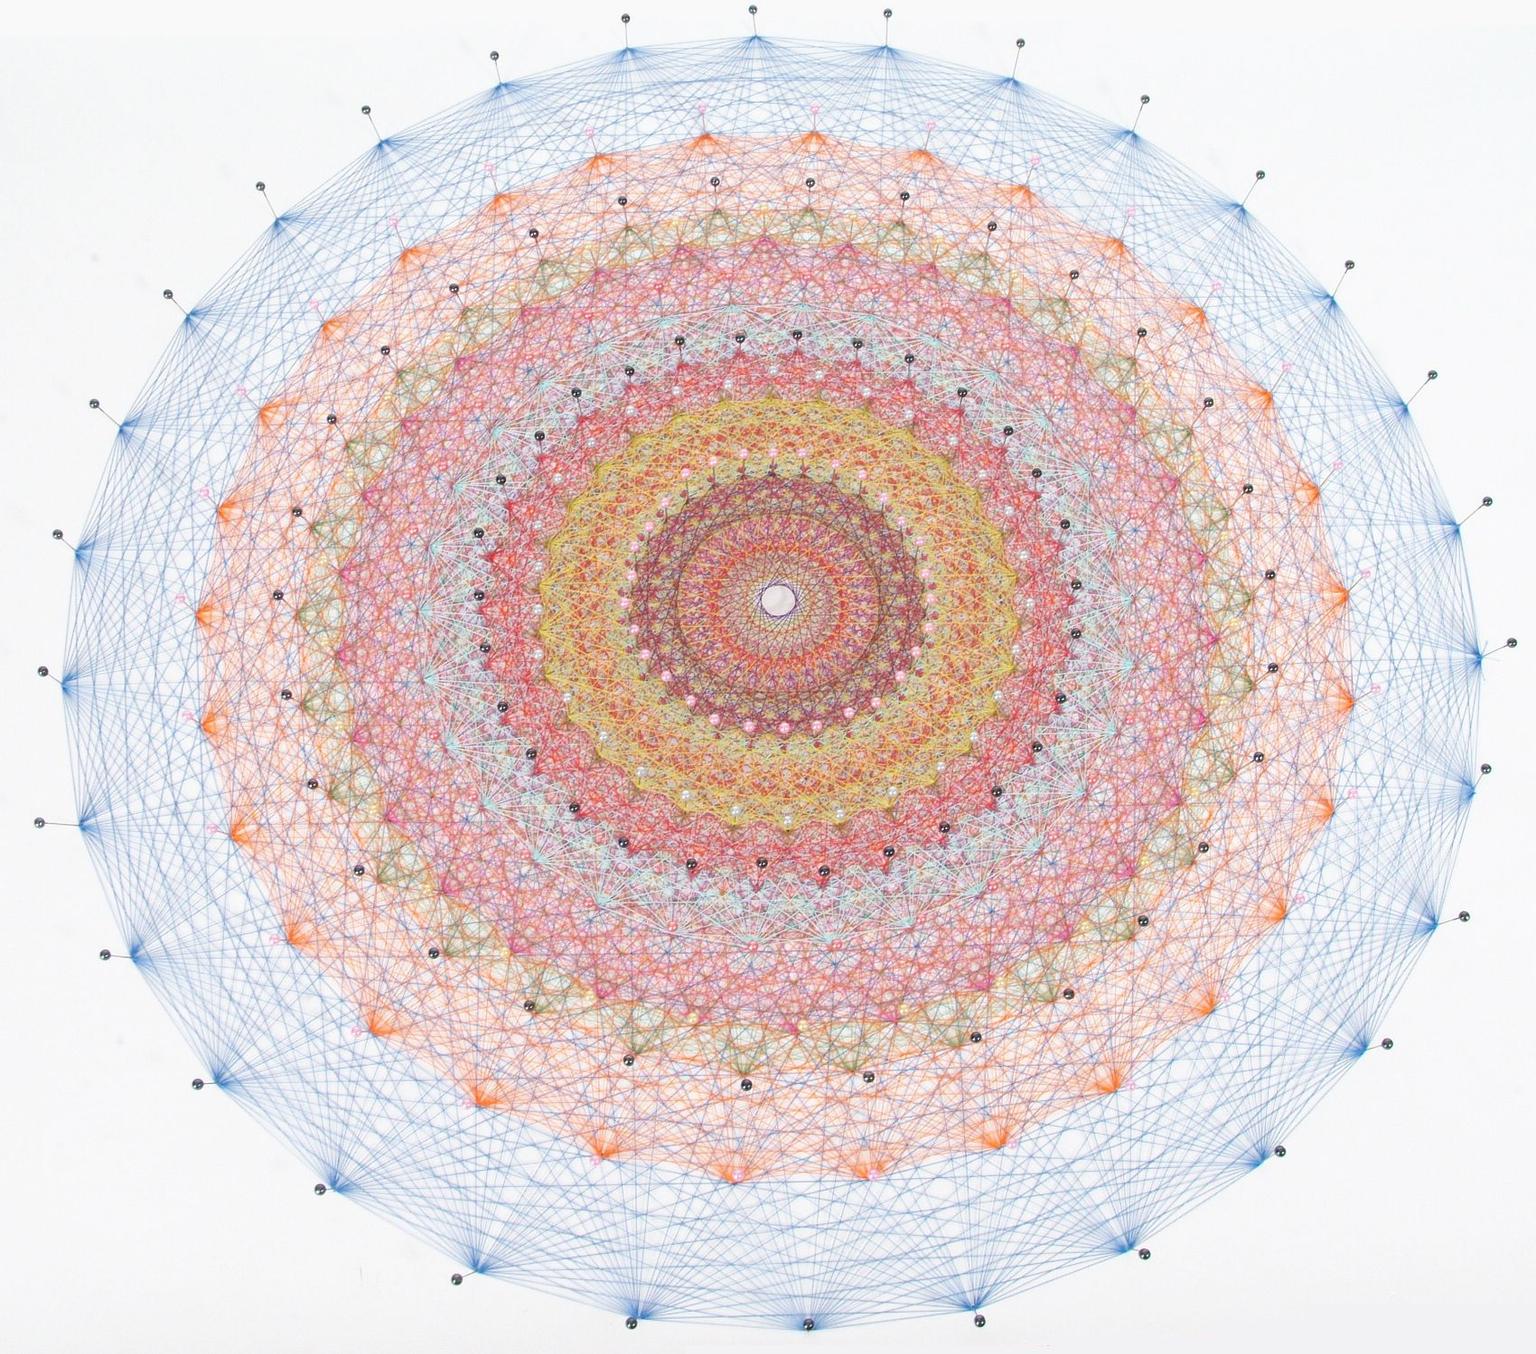 Image for entry 'E8 polytope stringy art'